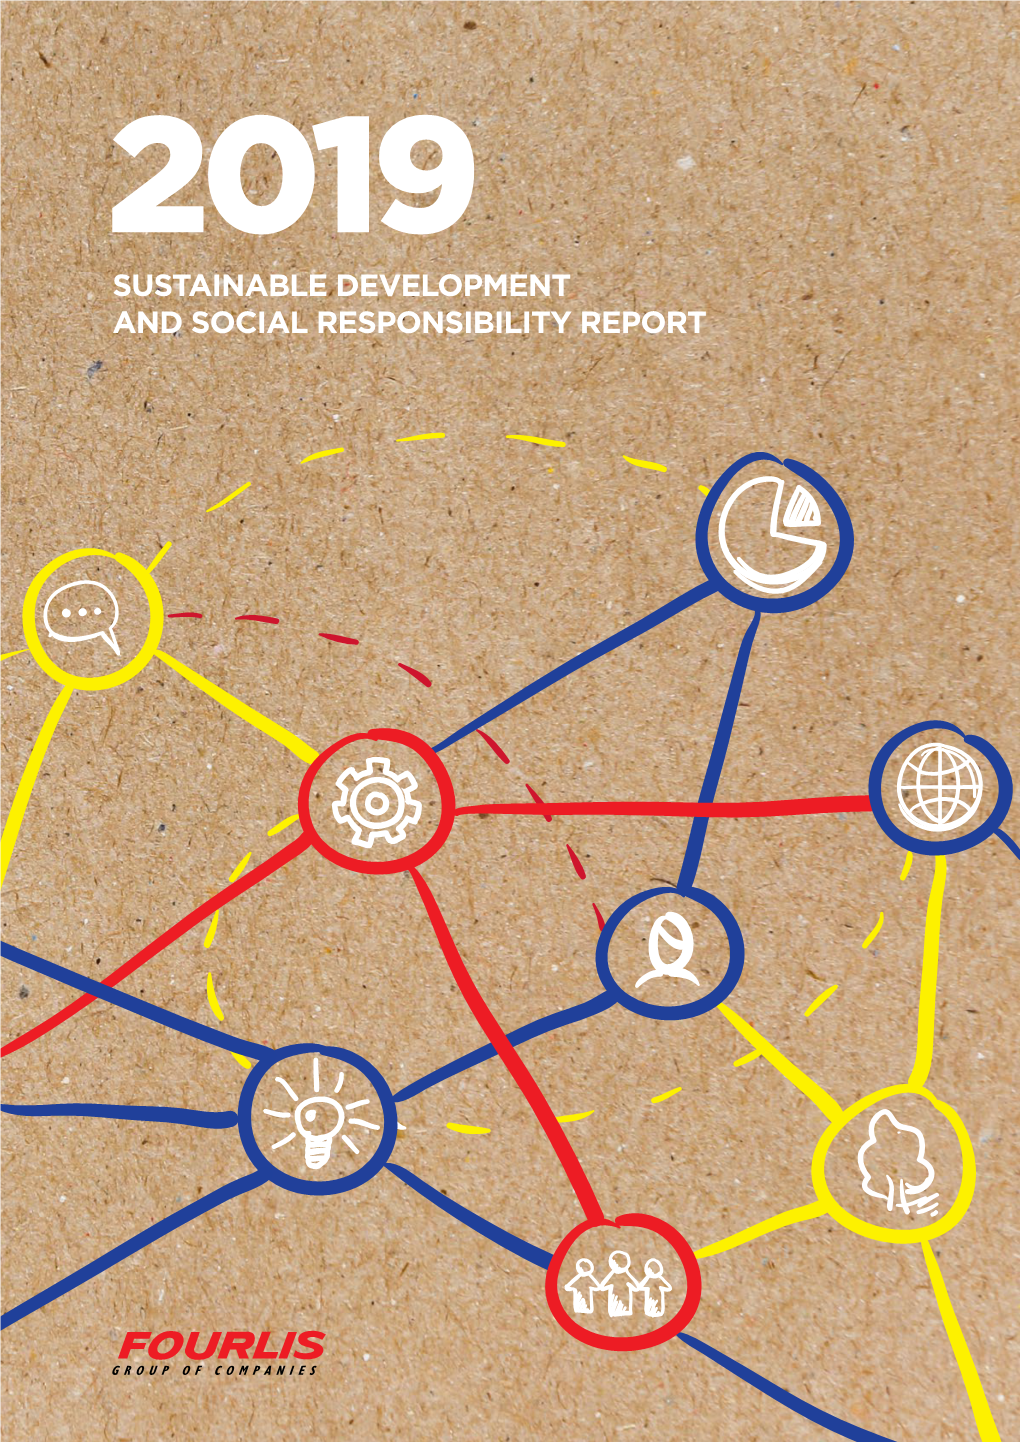 2019 Sustainable Development and Social Responsibility Report